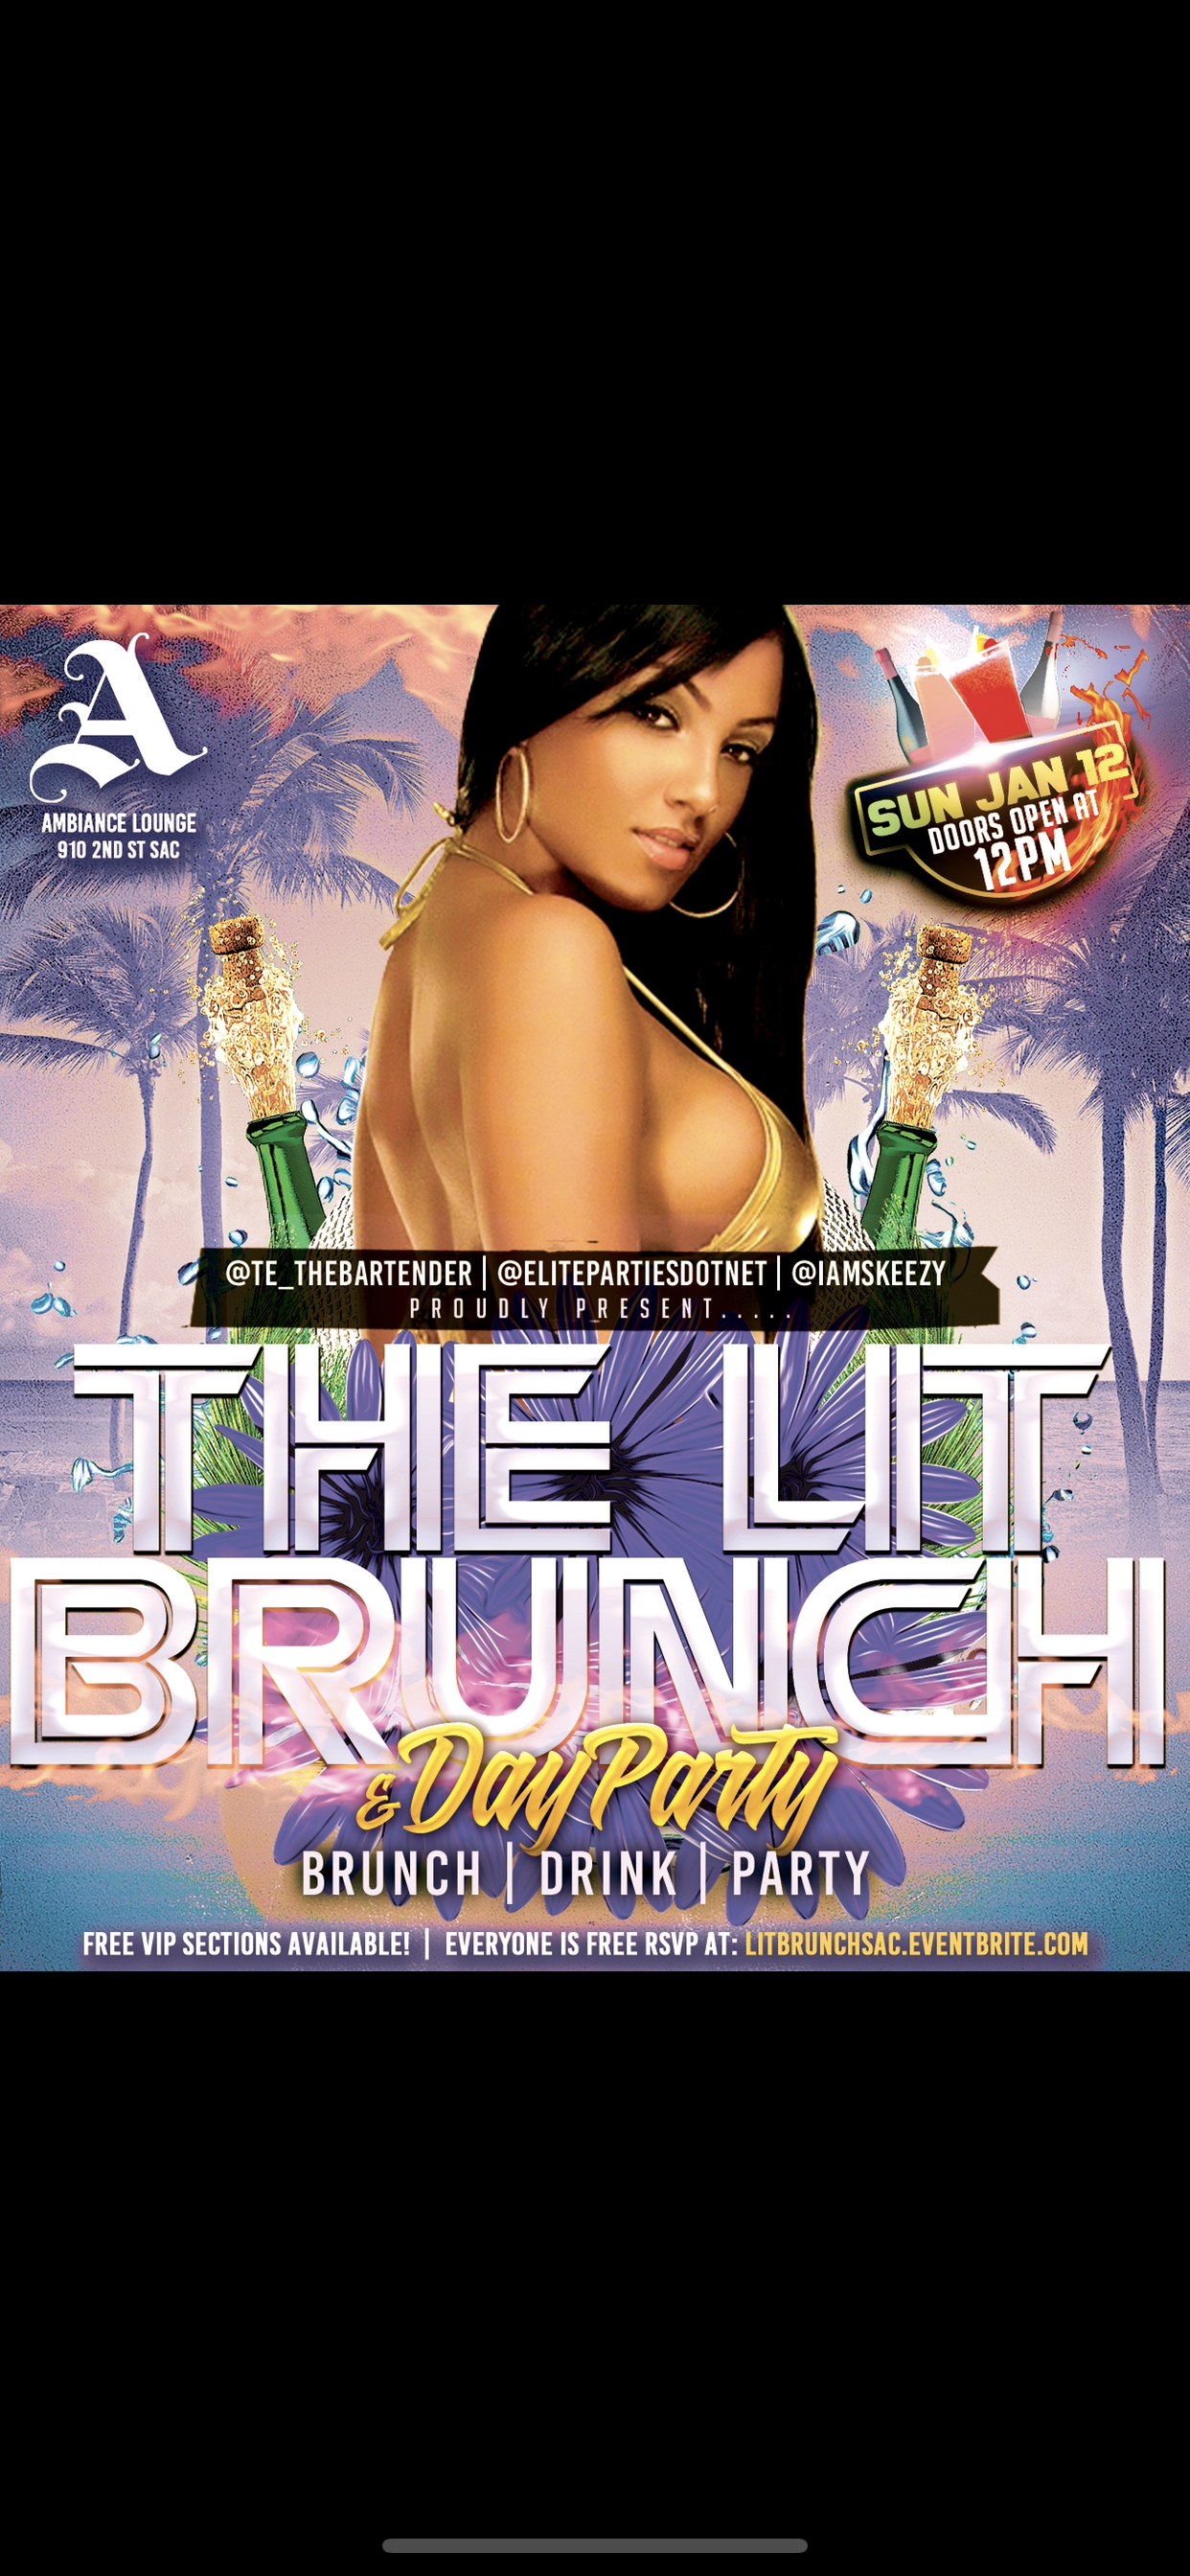 The Lit Brunch! & Day Party